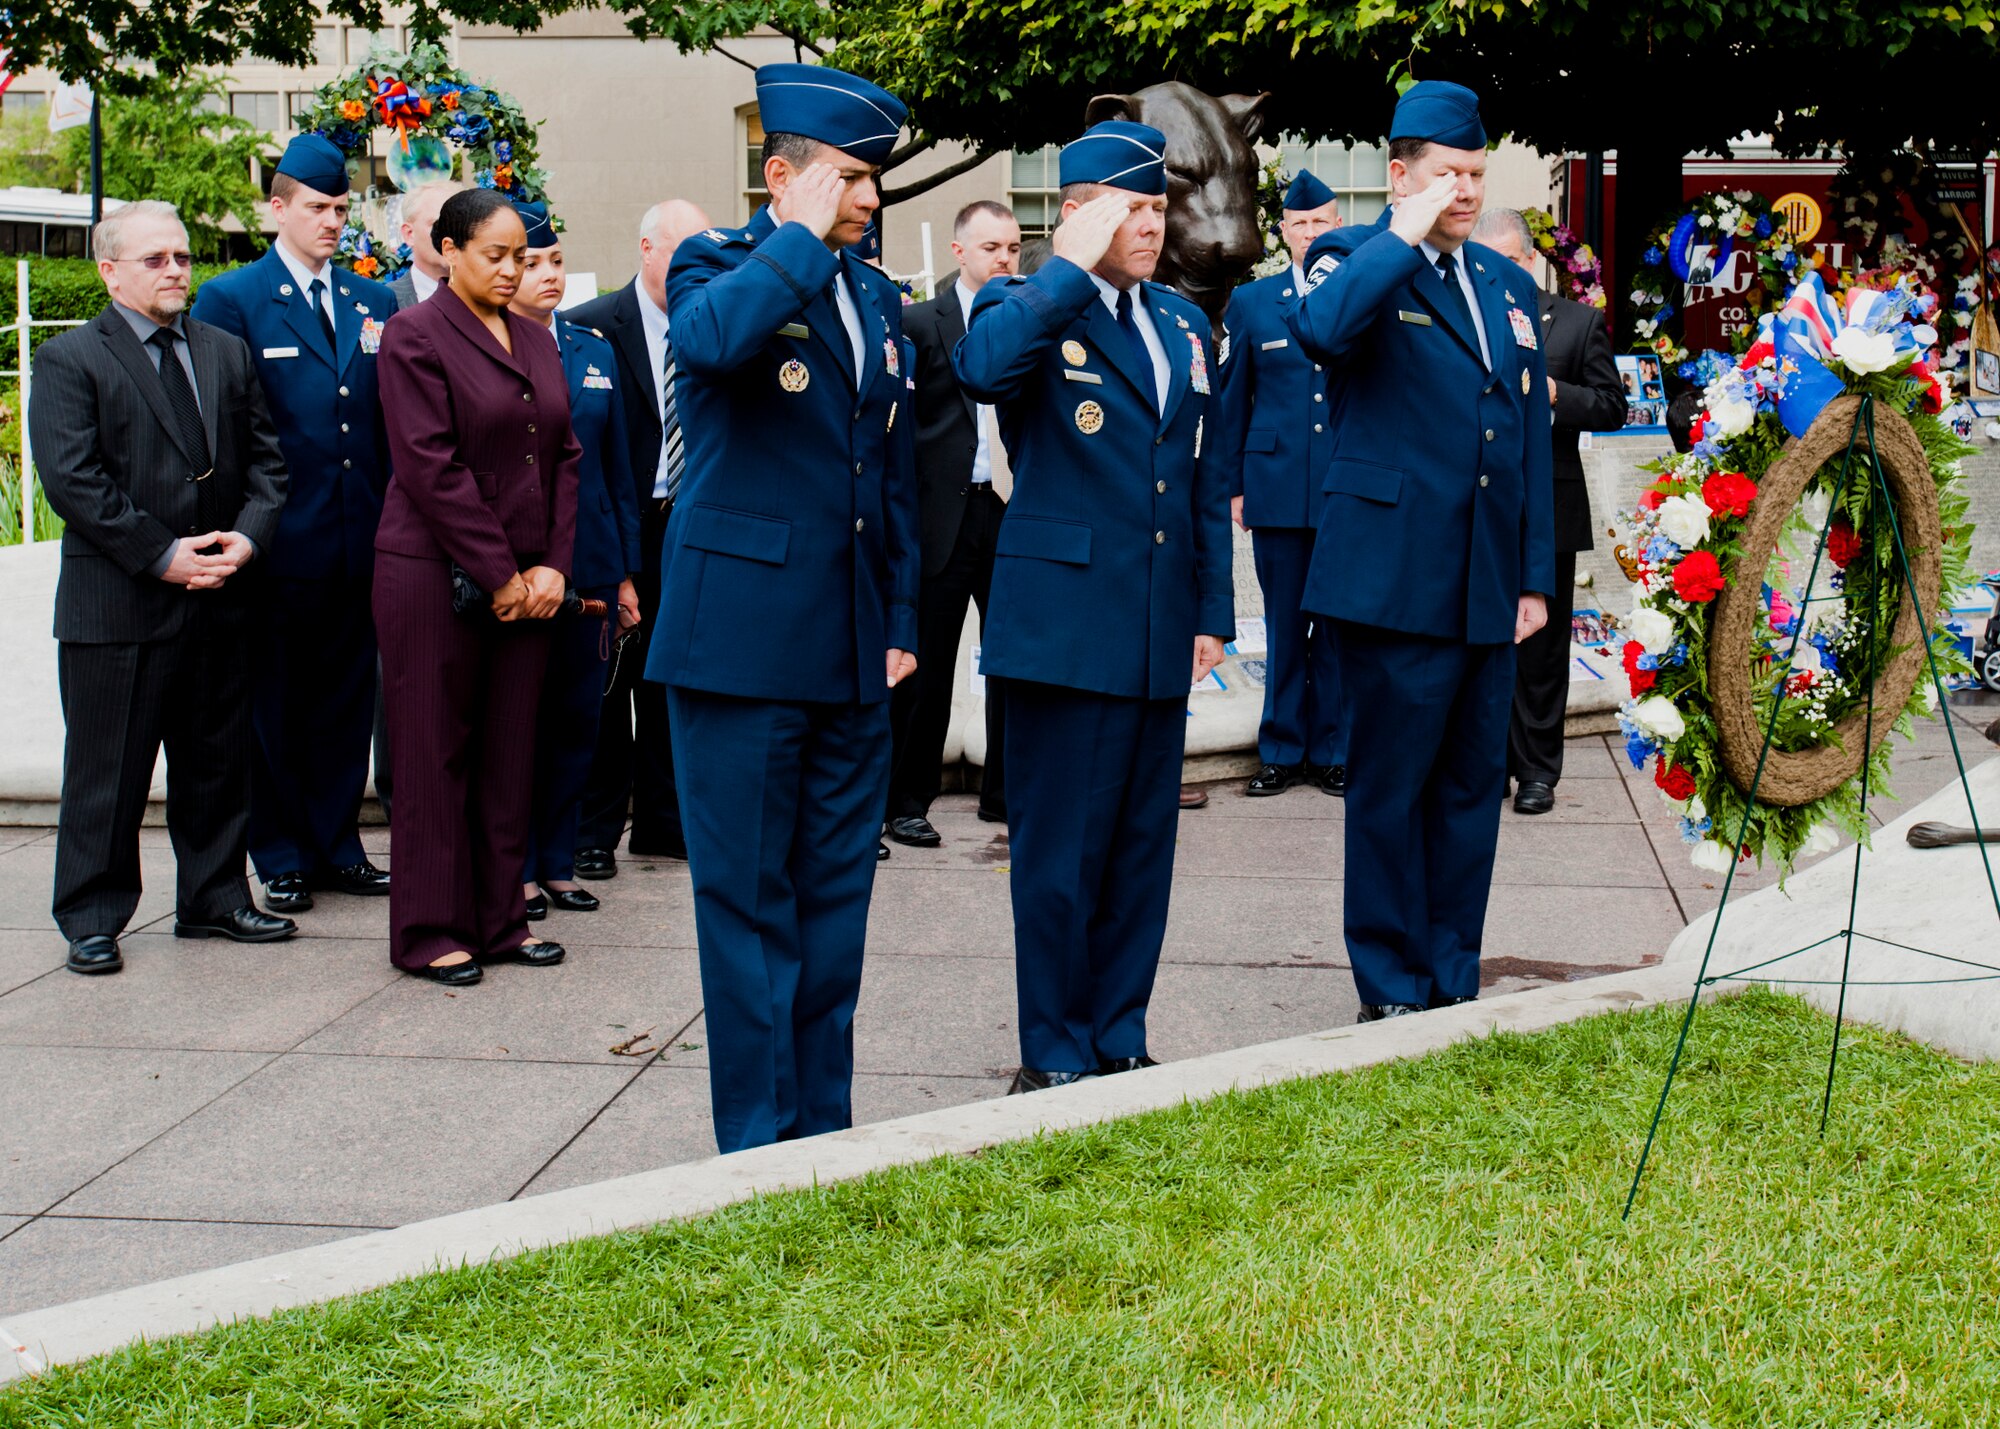 (From left) Col. Humberto Morales, OSI vice commander, Brig. Gen. Kevin Jacobsen, OSI commander, and Chief Master Sgt. John Fine, OSI command chief, salute the wreath placed in honor of OSI's fallen members. The wreath will be displayed at the National Law Enforcement Officers Memorial in Washington, D.C. (U.S. Air Force photo by Mike Hastings.) 